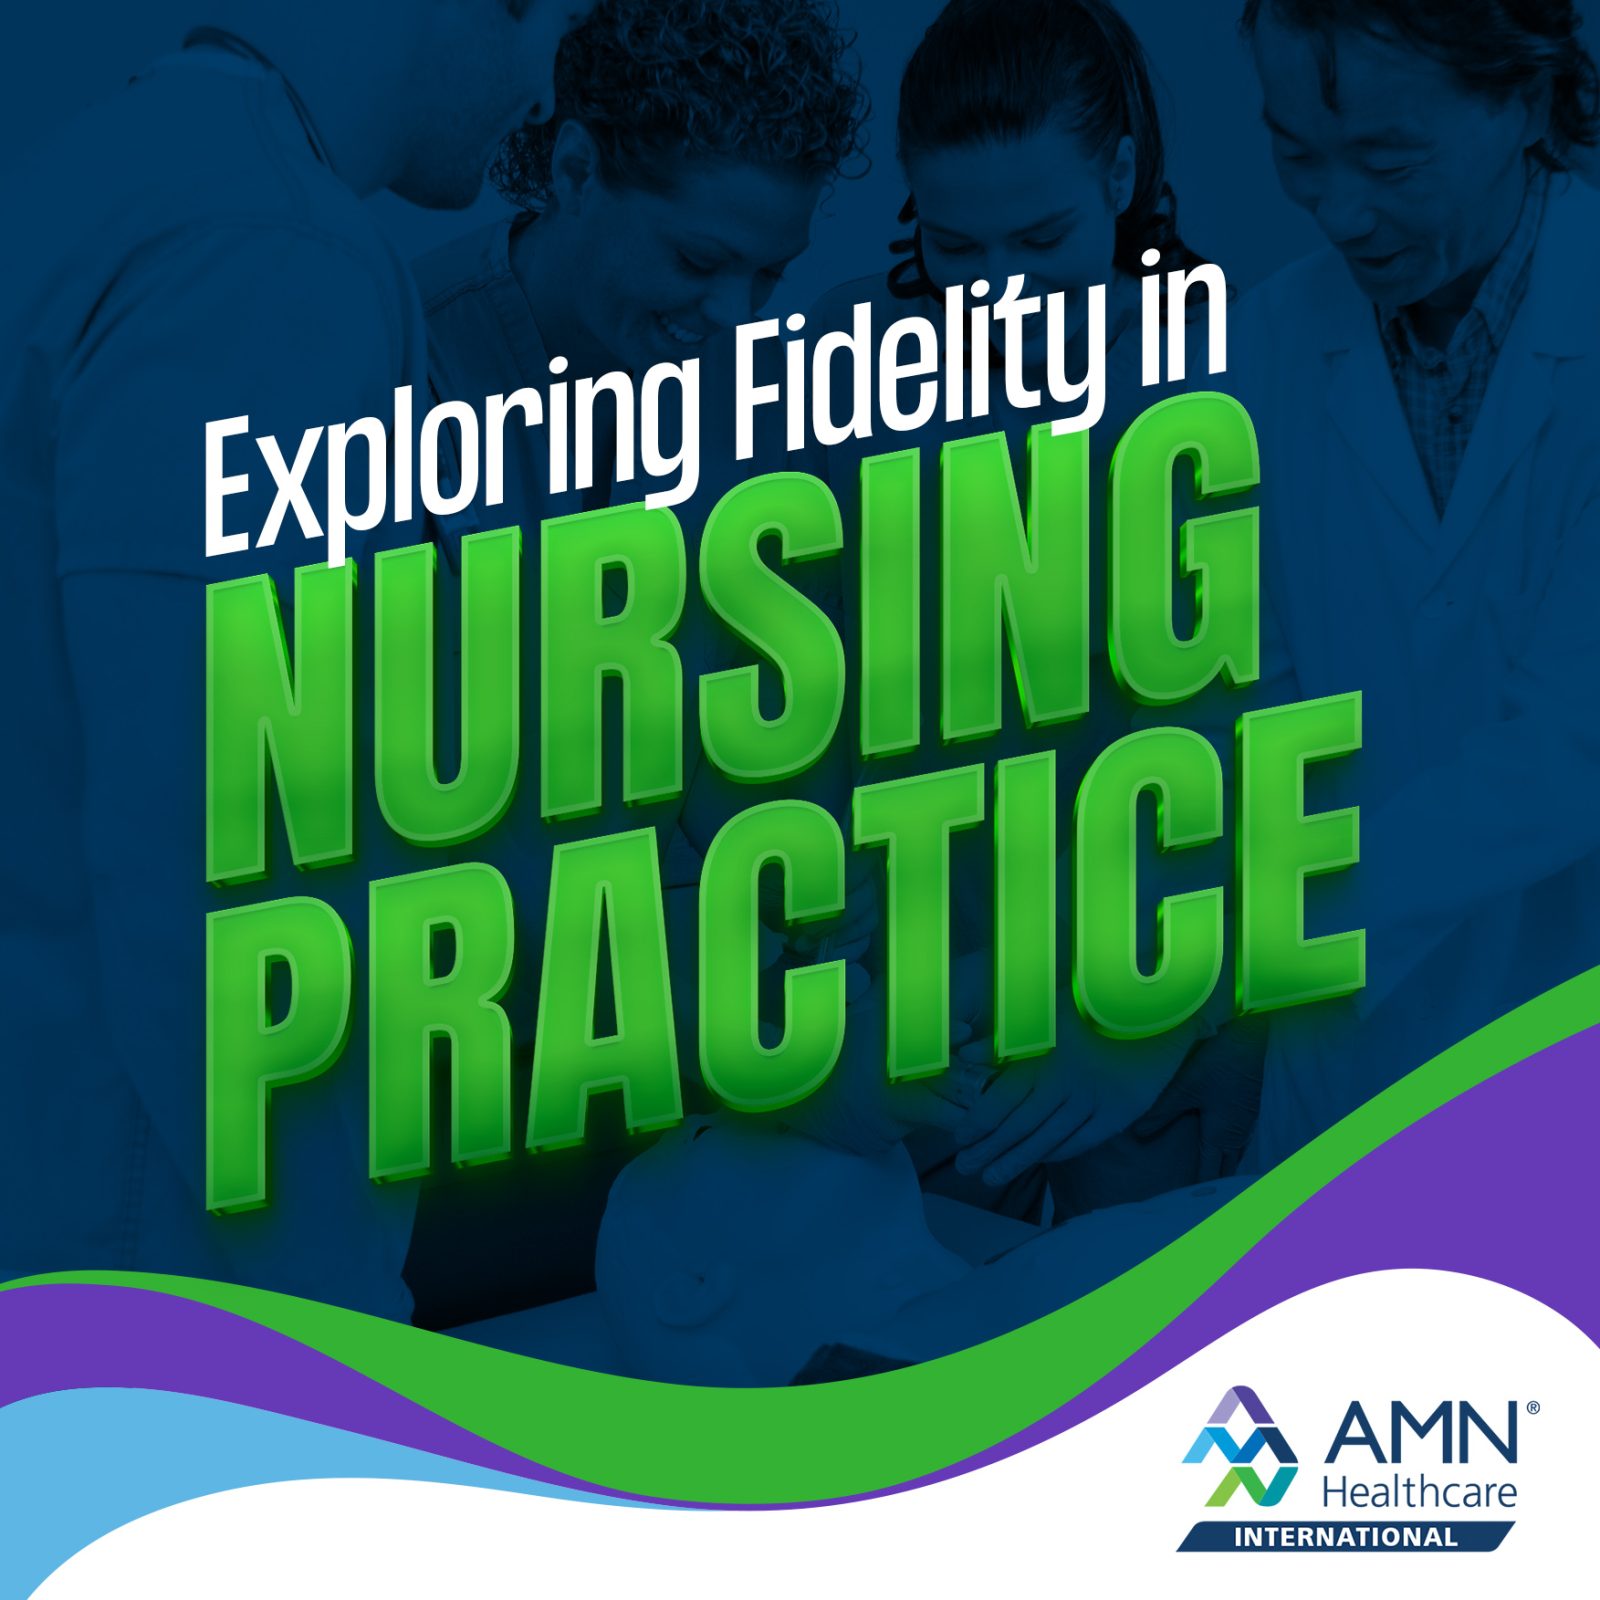 Fidelity in Nursing: The Cornerstone of Ethical Practice